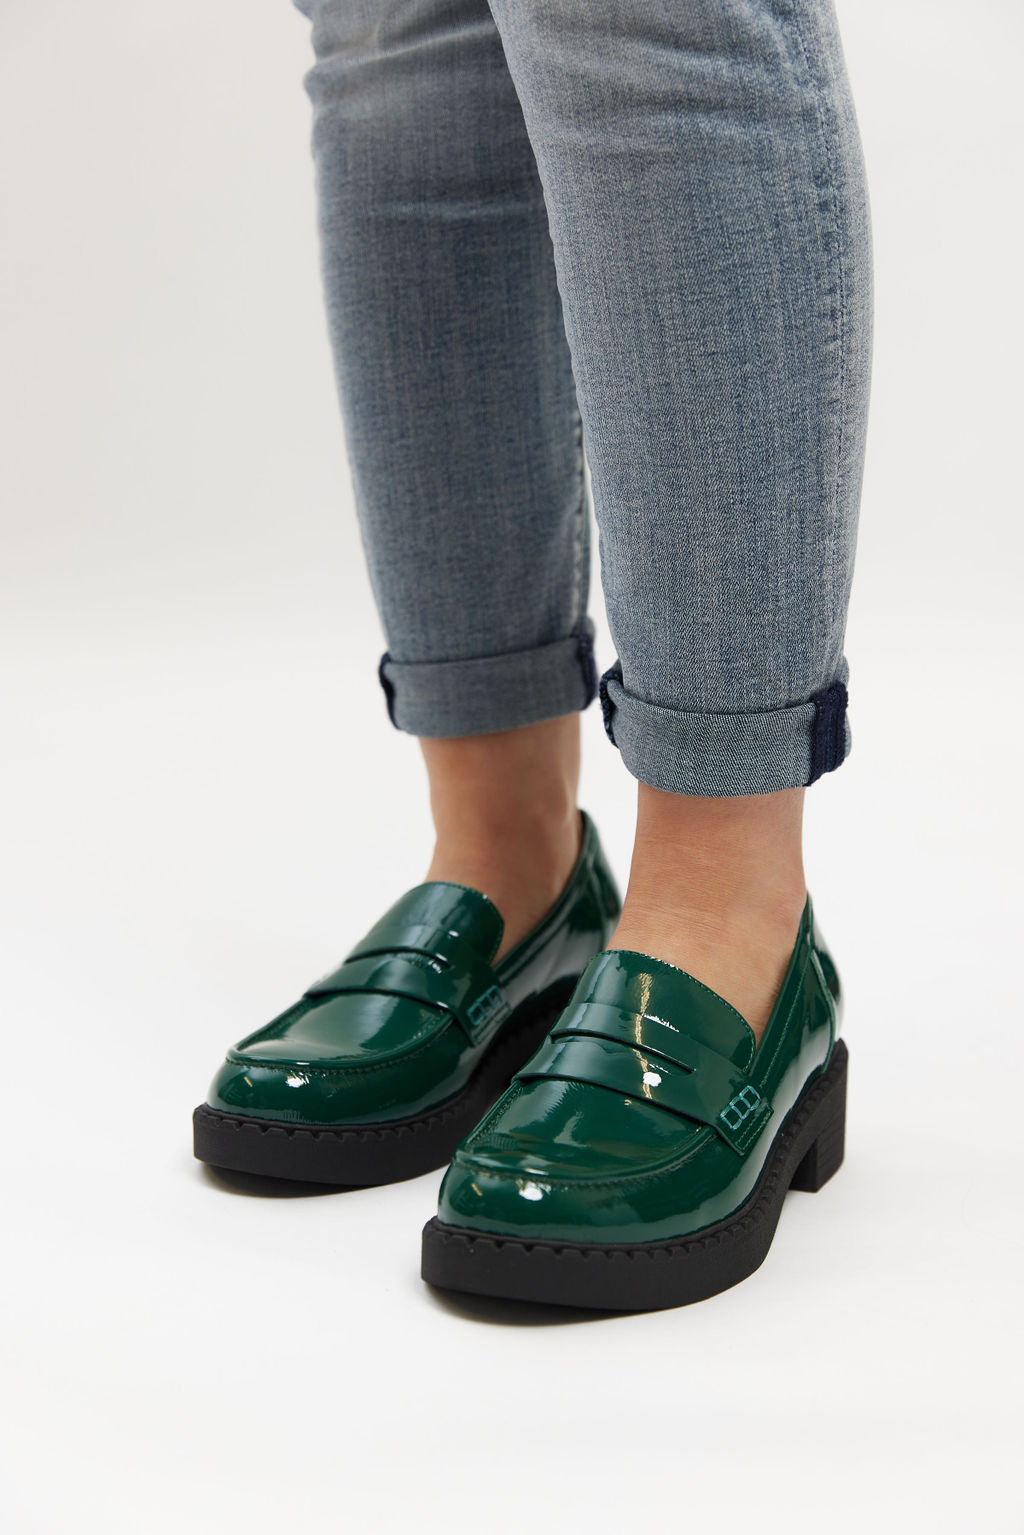 XAVIDE LOAFER EMERALD PATENT